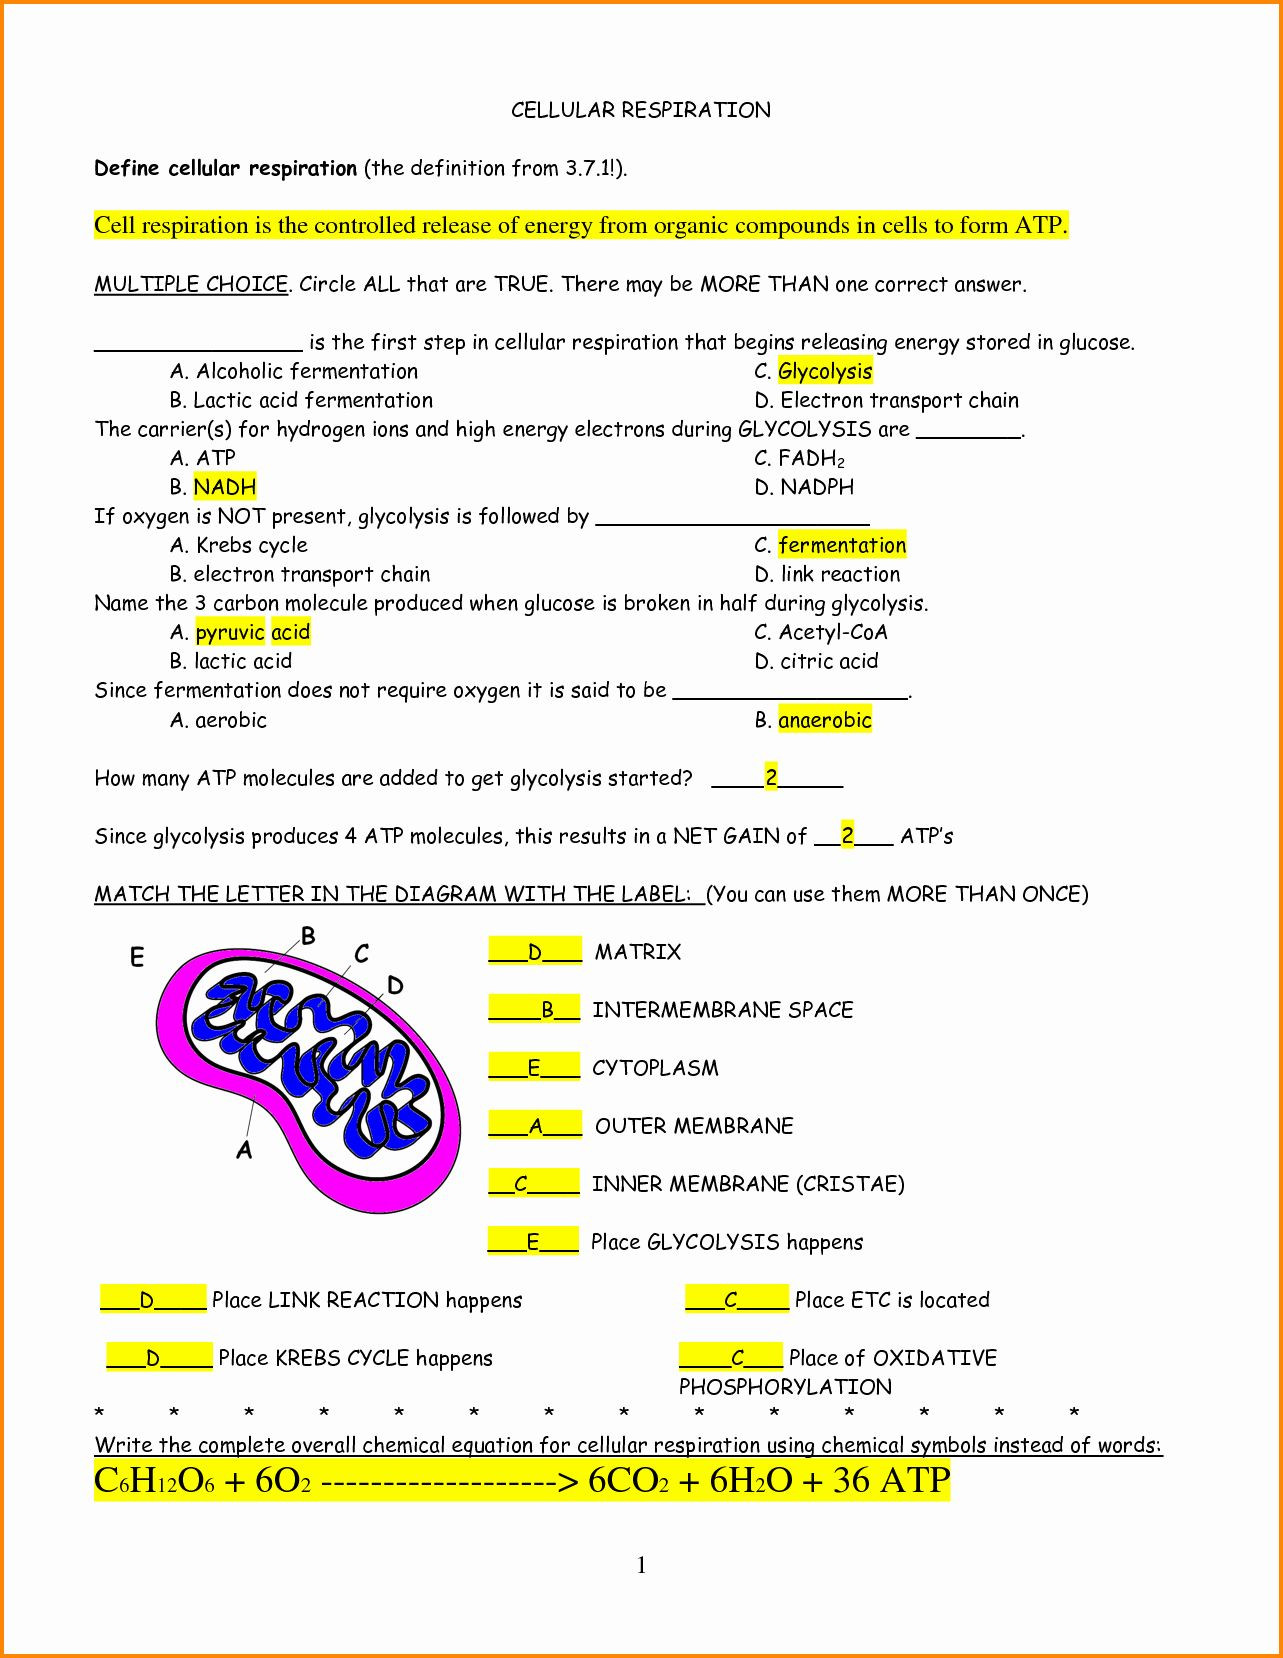 Photosynthesis Diagrams Worksheet Answers 50 Synthesis Diagrams Worksheet Answers In 2020